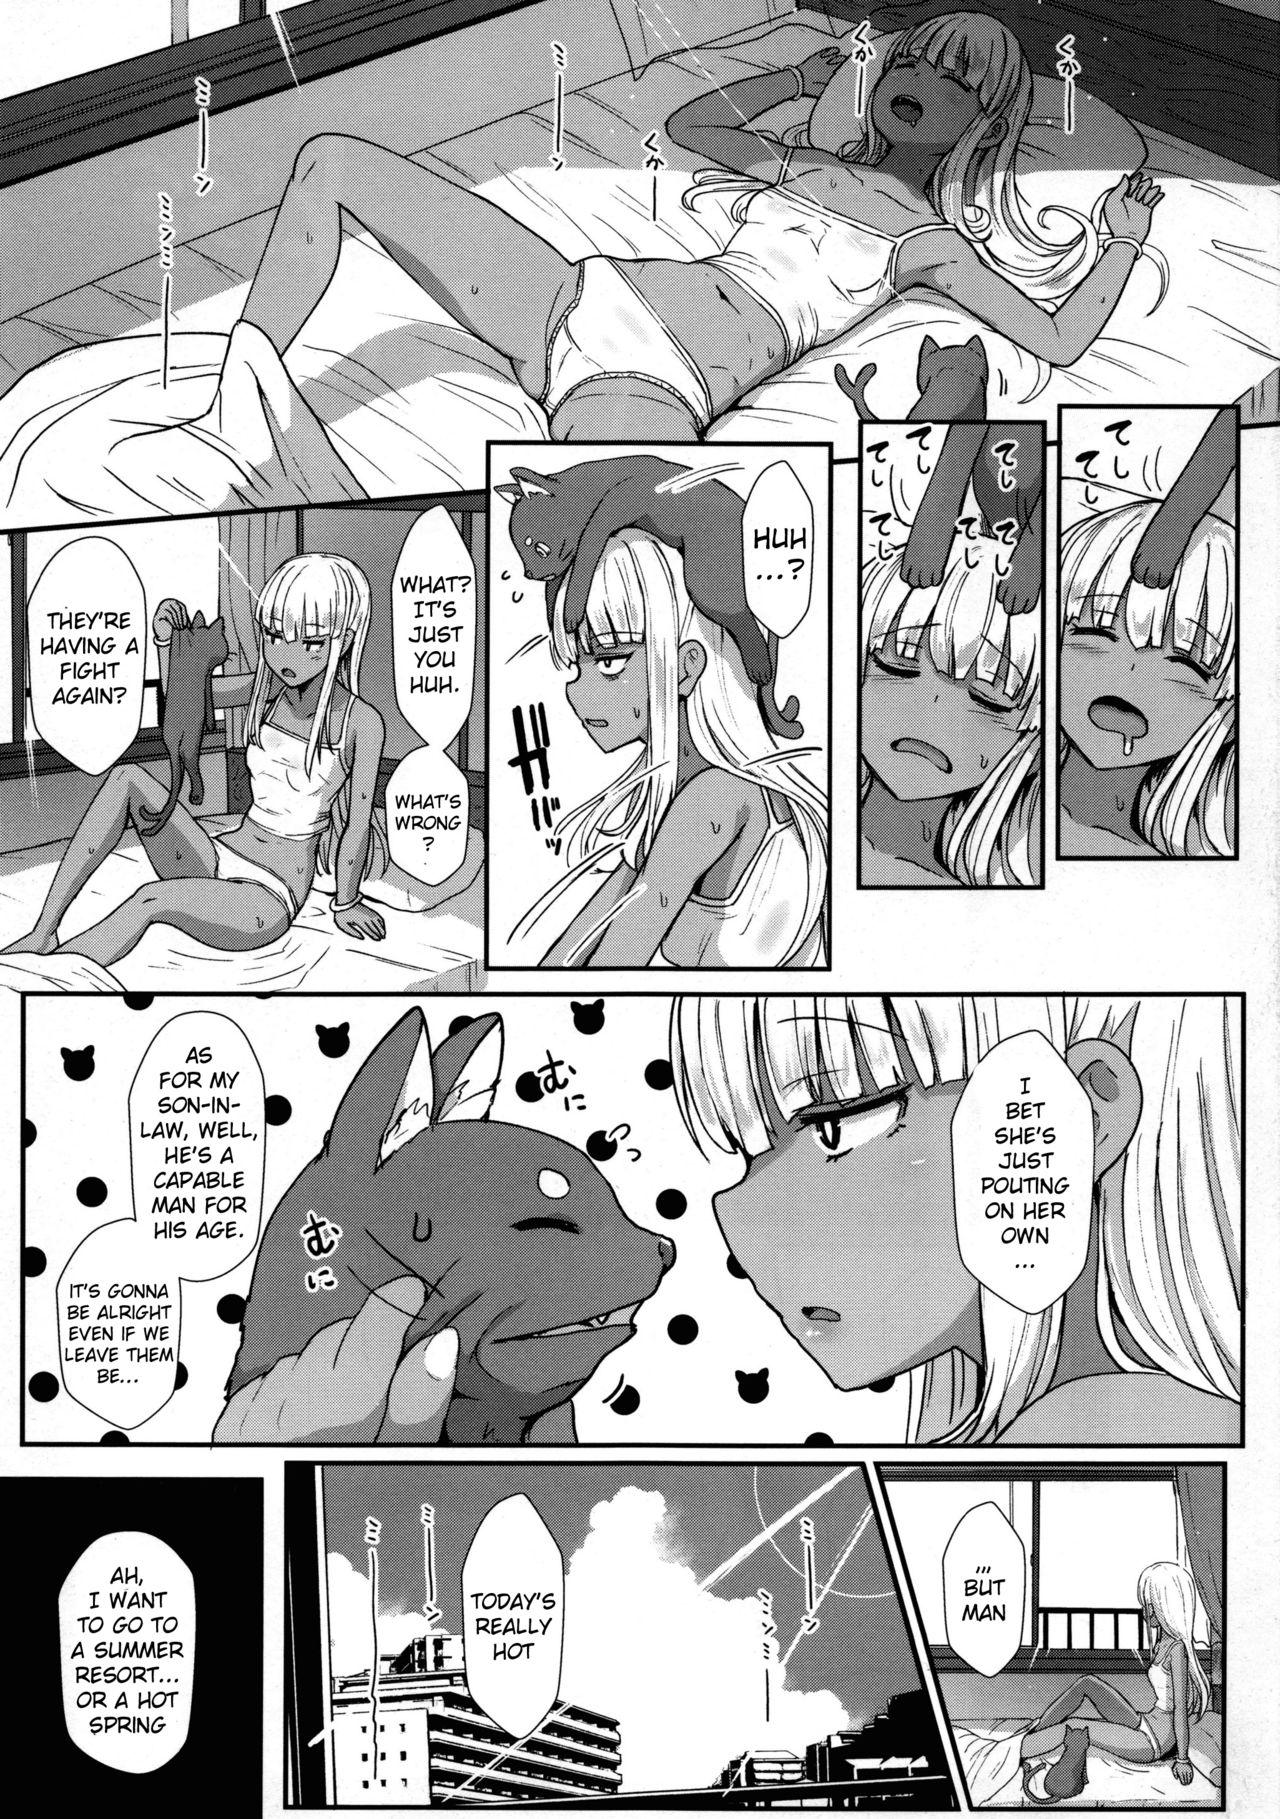 Two LiLiM's kiss - Original Asiansex - Page 2